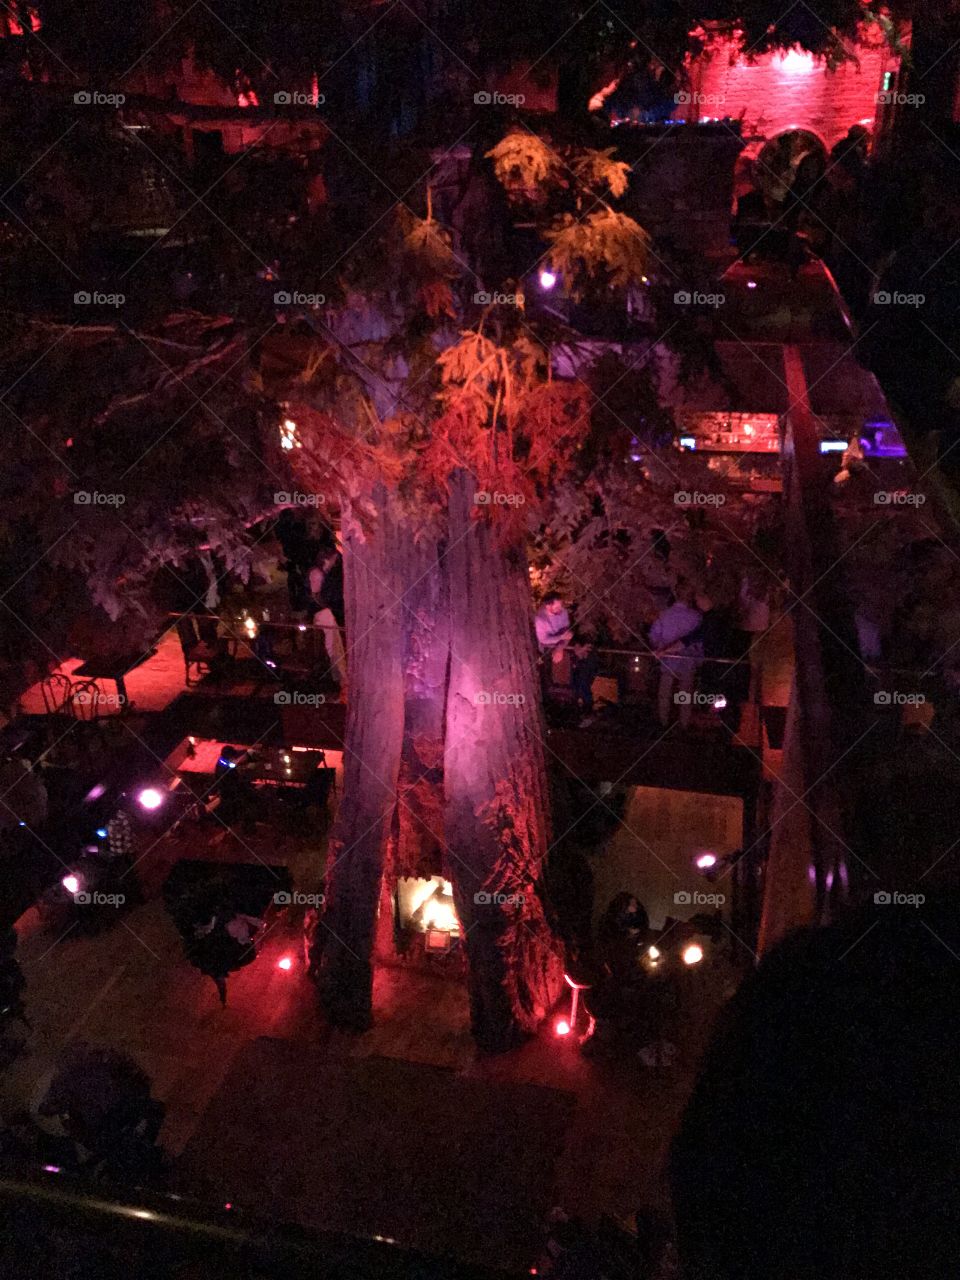 Cliftons republic bar. Indoor nature scene of tree in a building